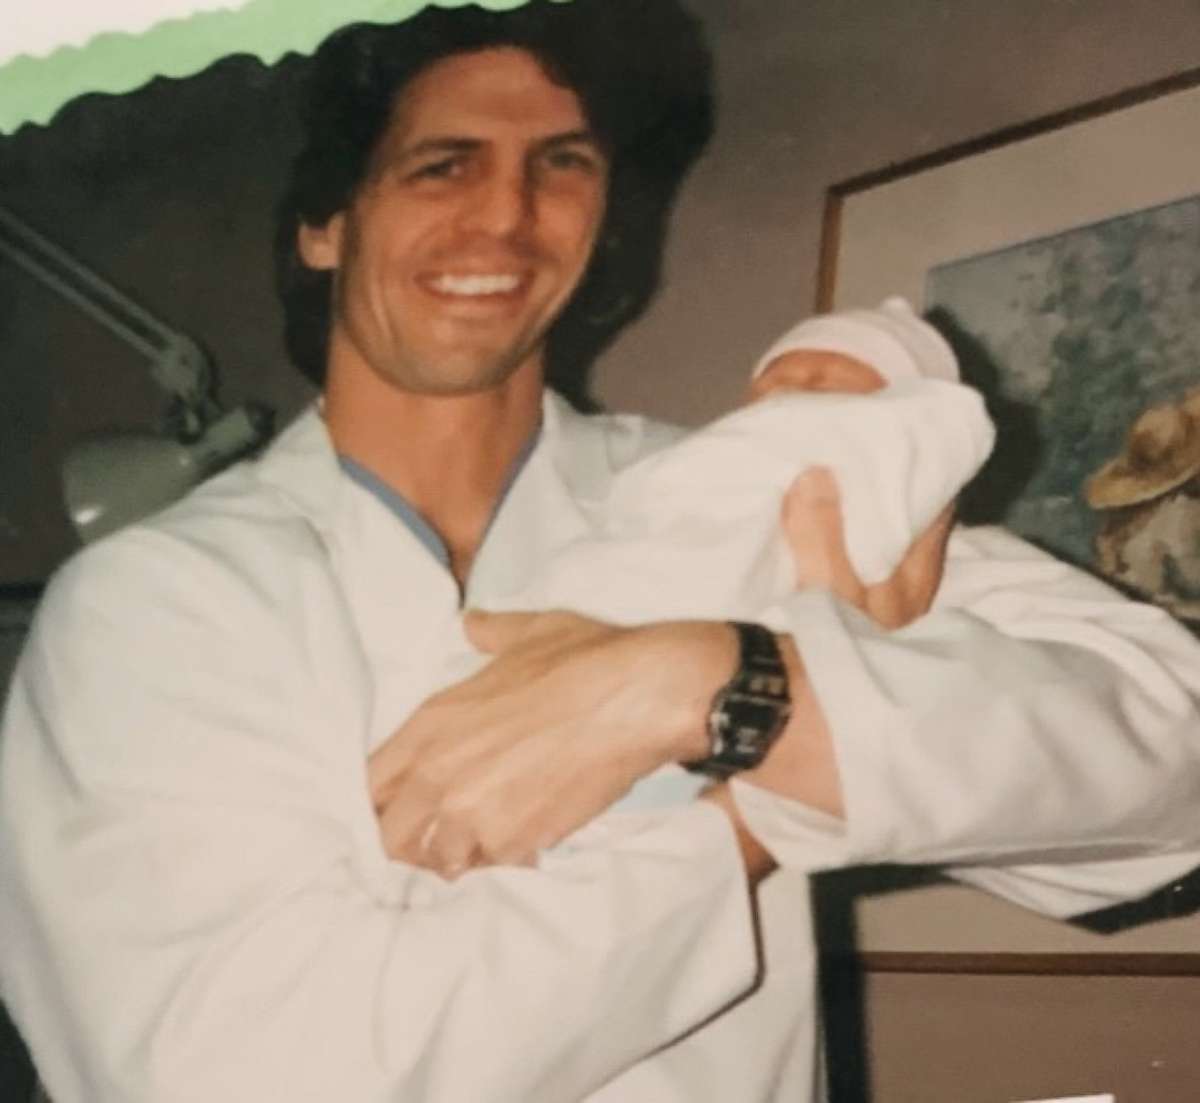 PHOTO: Dr. Bryan Cox of Methodist Hospital in San Antonio, Texas, delivered Lauren Cortez on March 23, 1995. All came full-circle when Cox delivered Cortez's son, Logan James, who was born July 26, weighing 6 pounds, 1 ounce.